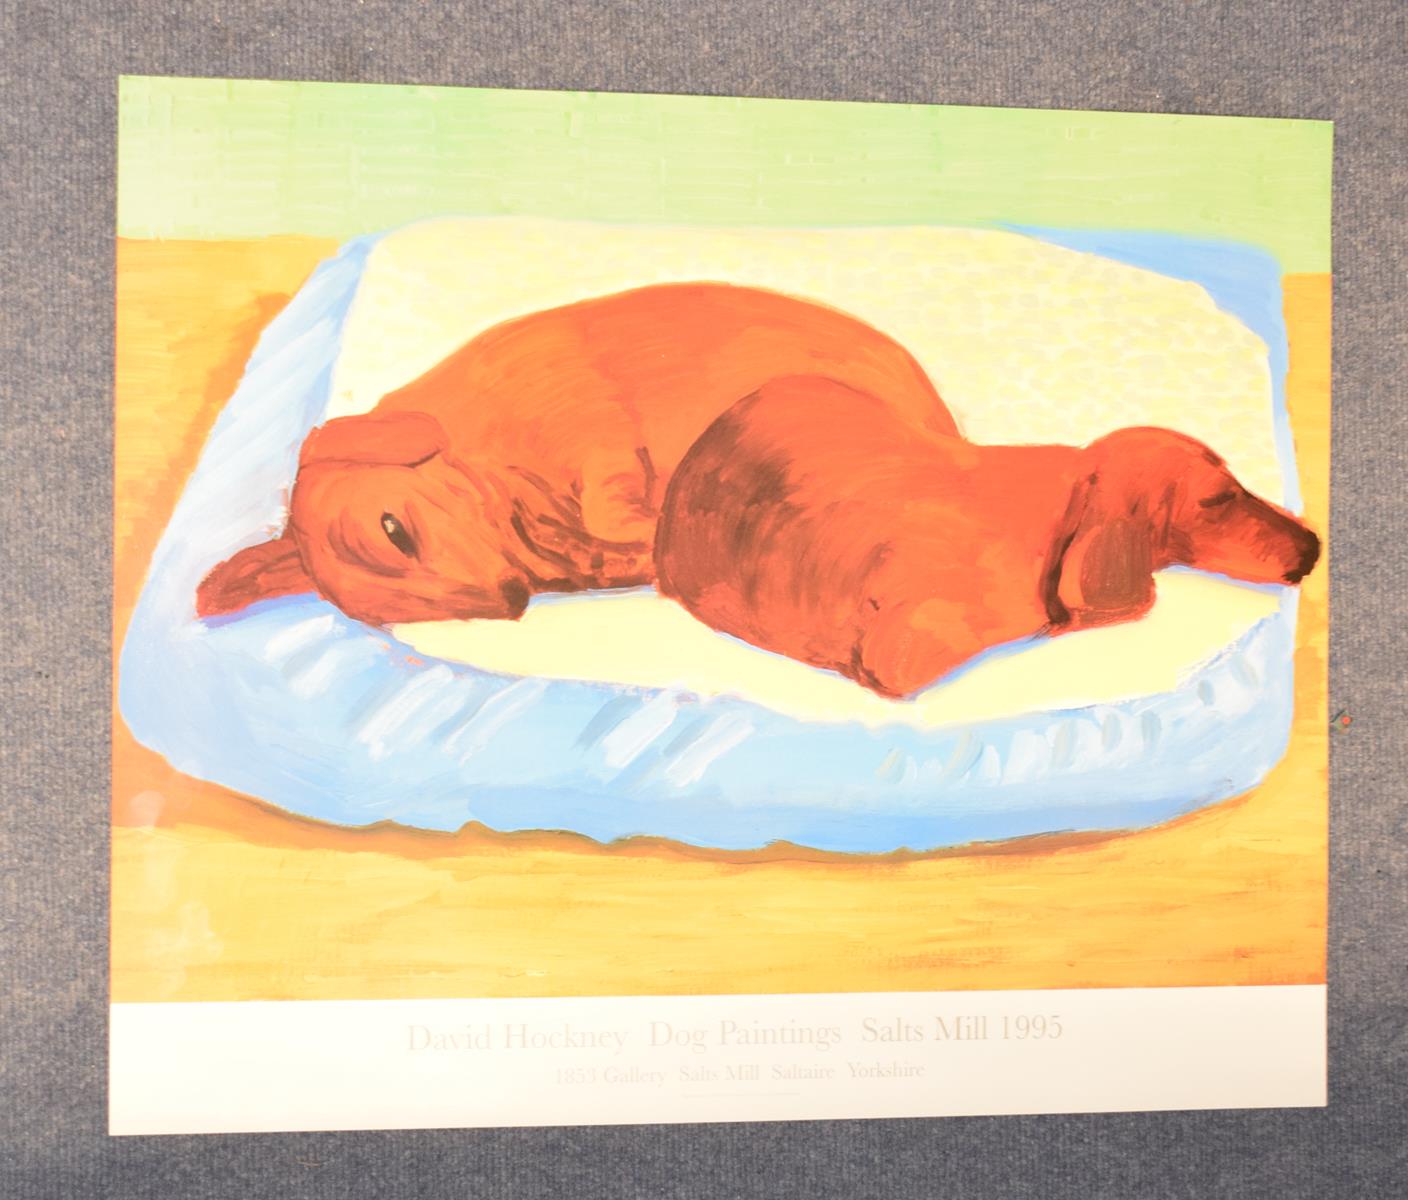 After David Hockney, dog paintings, Salts Mill 1995, colour poster, 53 x 65 cm and another (both - Image 3 of 3